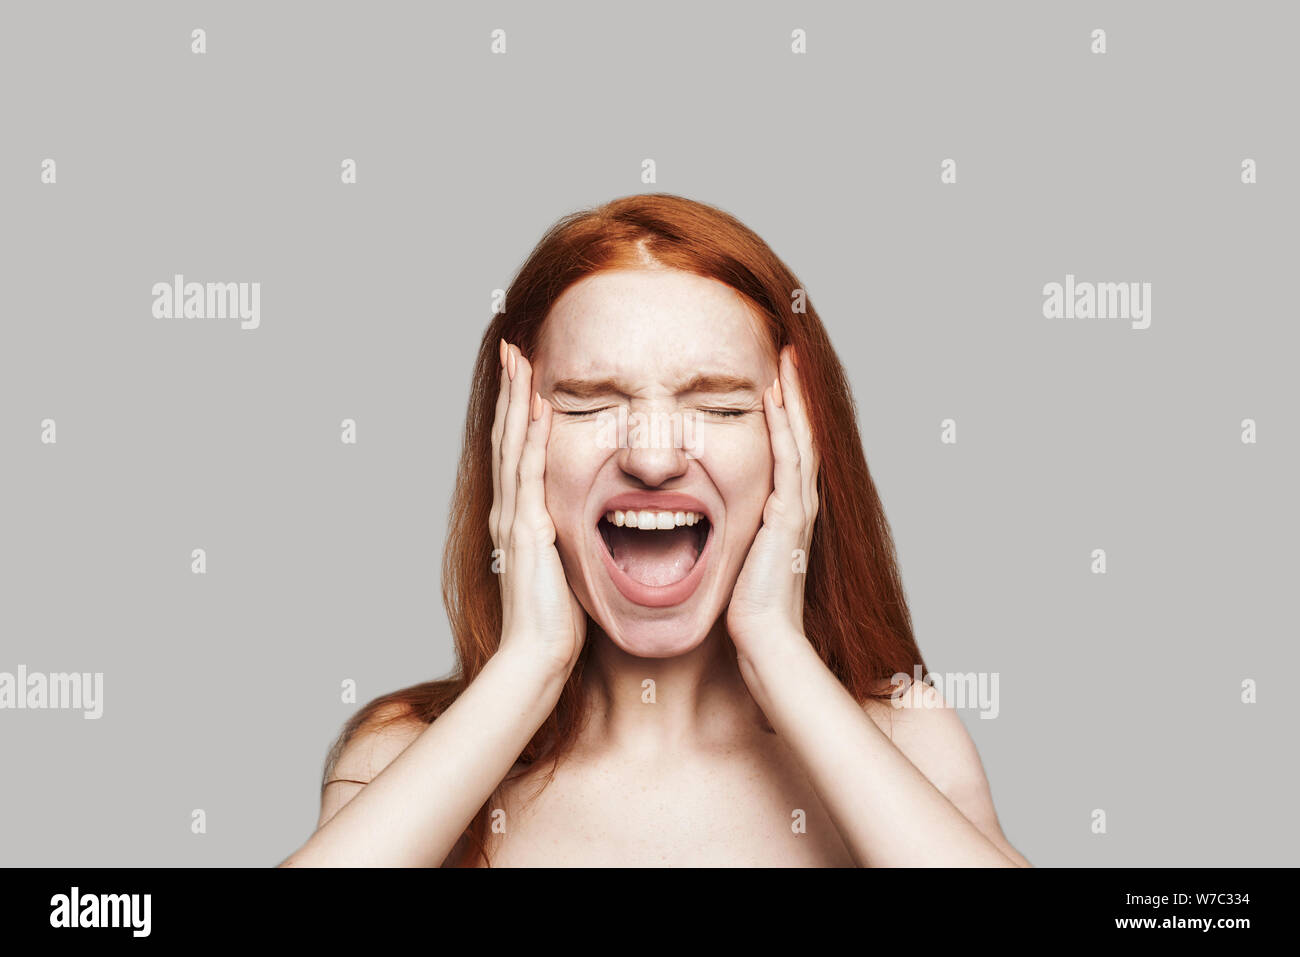 Screaming Scary Face Stock Footage ~ Royalty Free Stock Videos